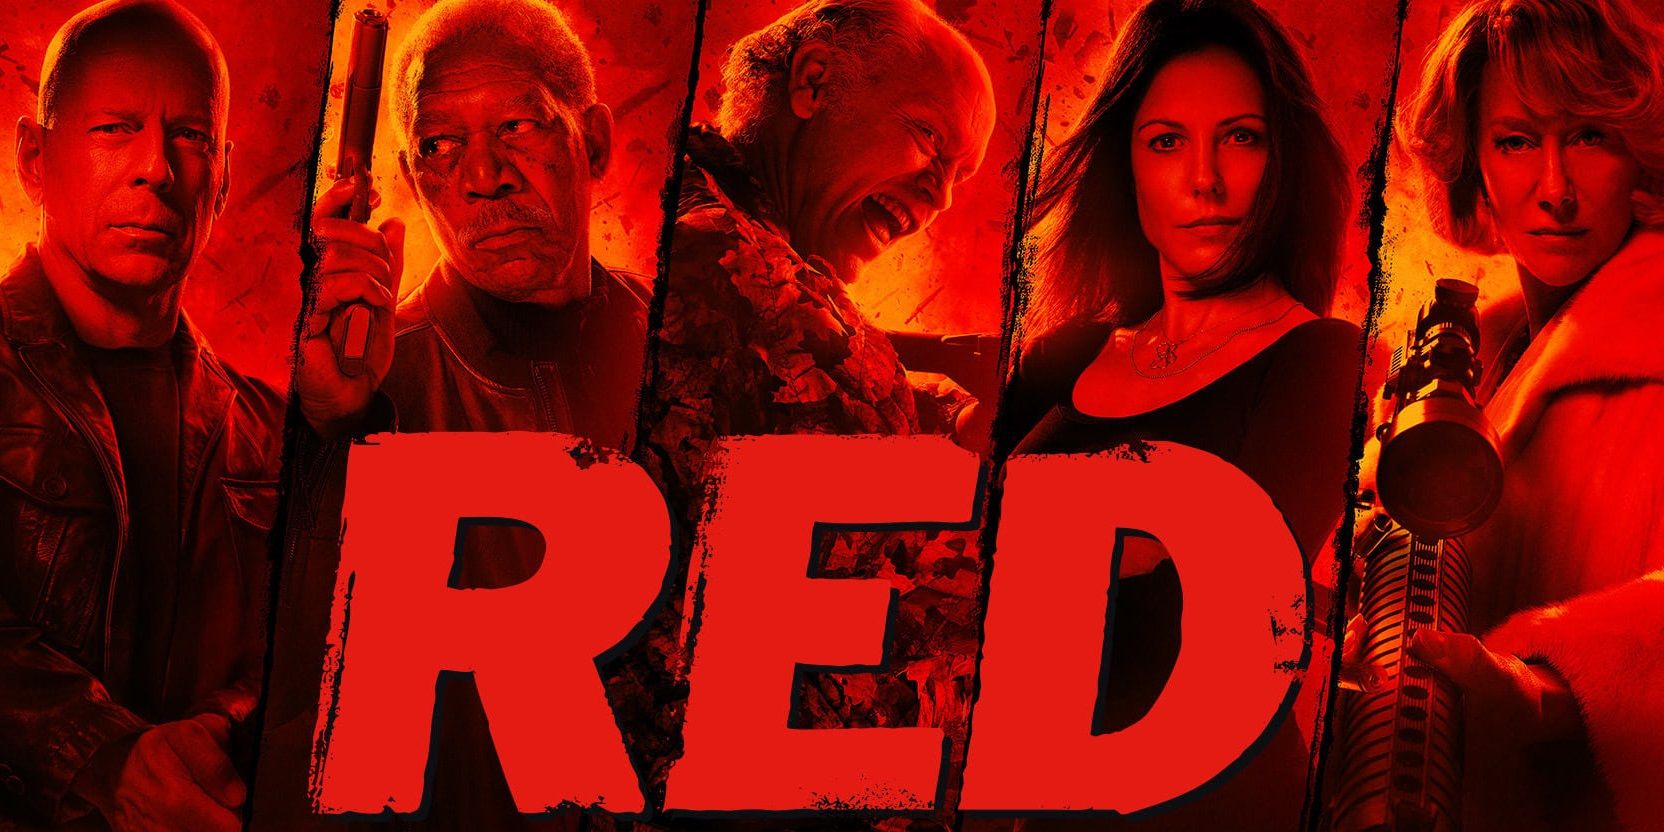 The poster for Red featuring the cast